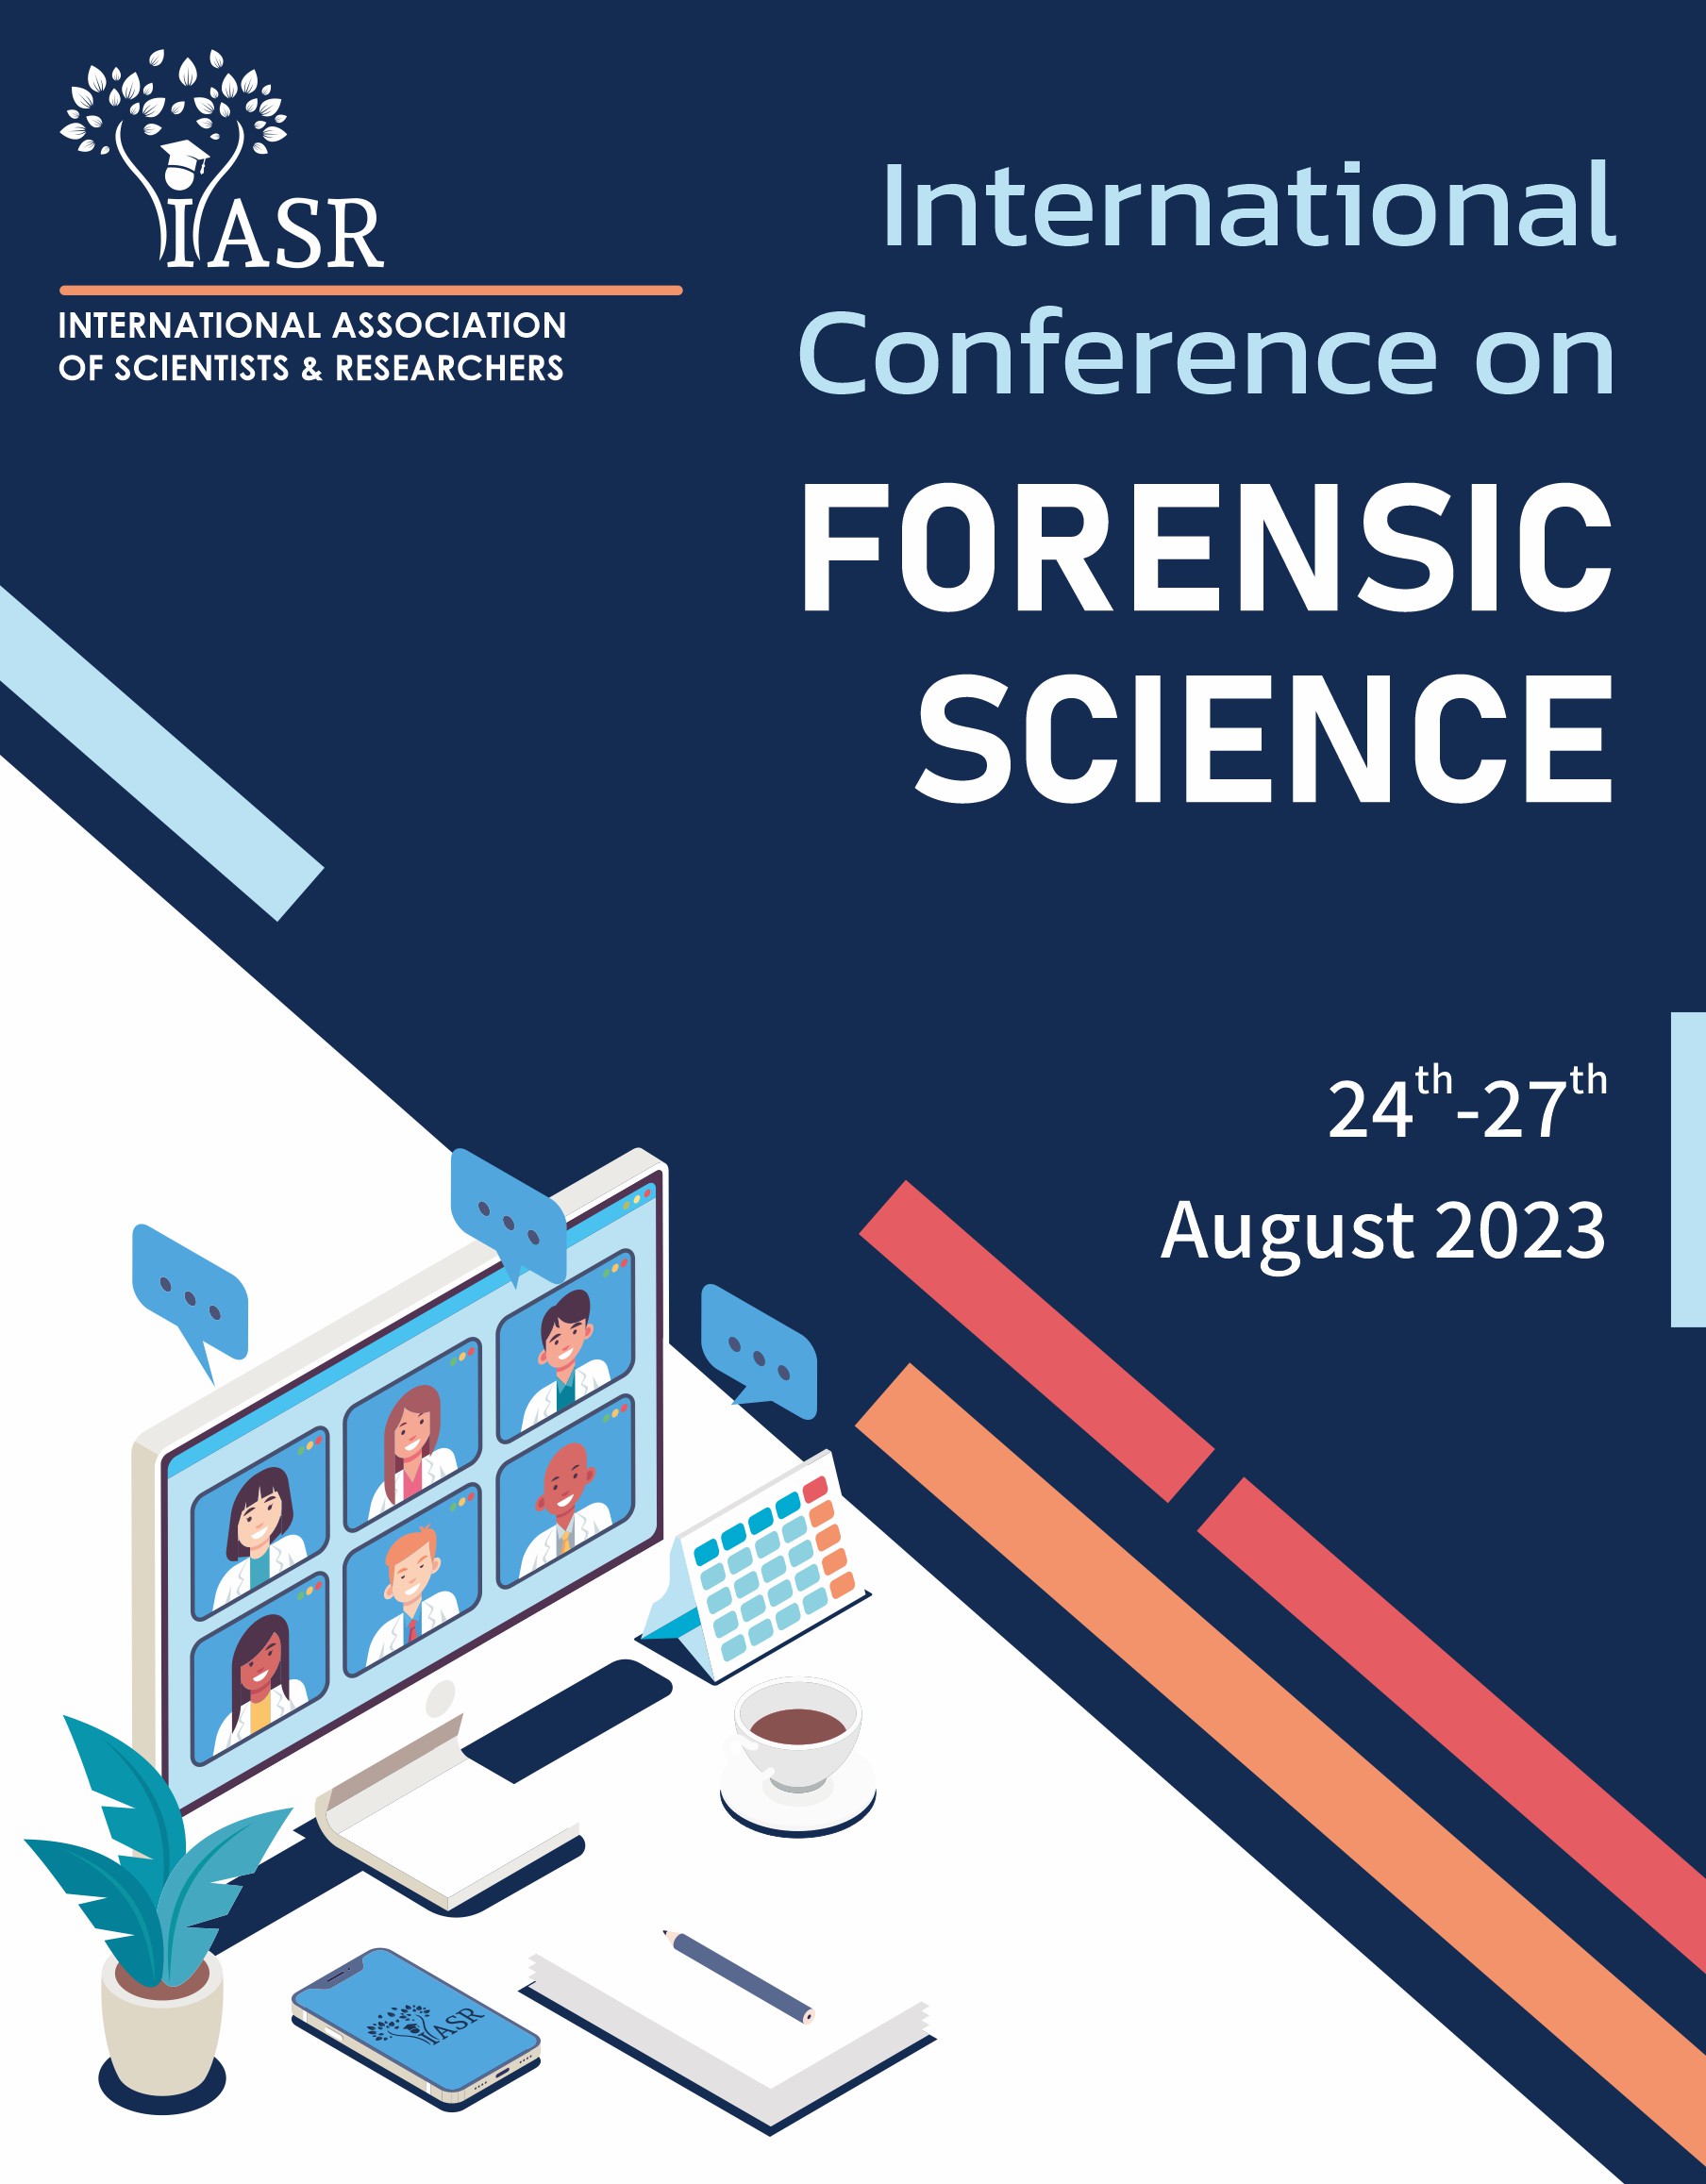 14th IASR International Conference on Forensic Science